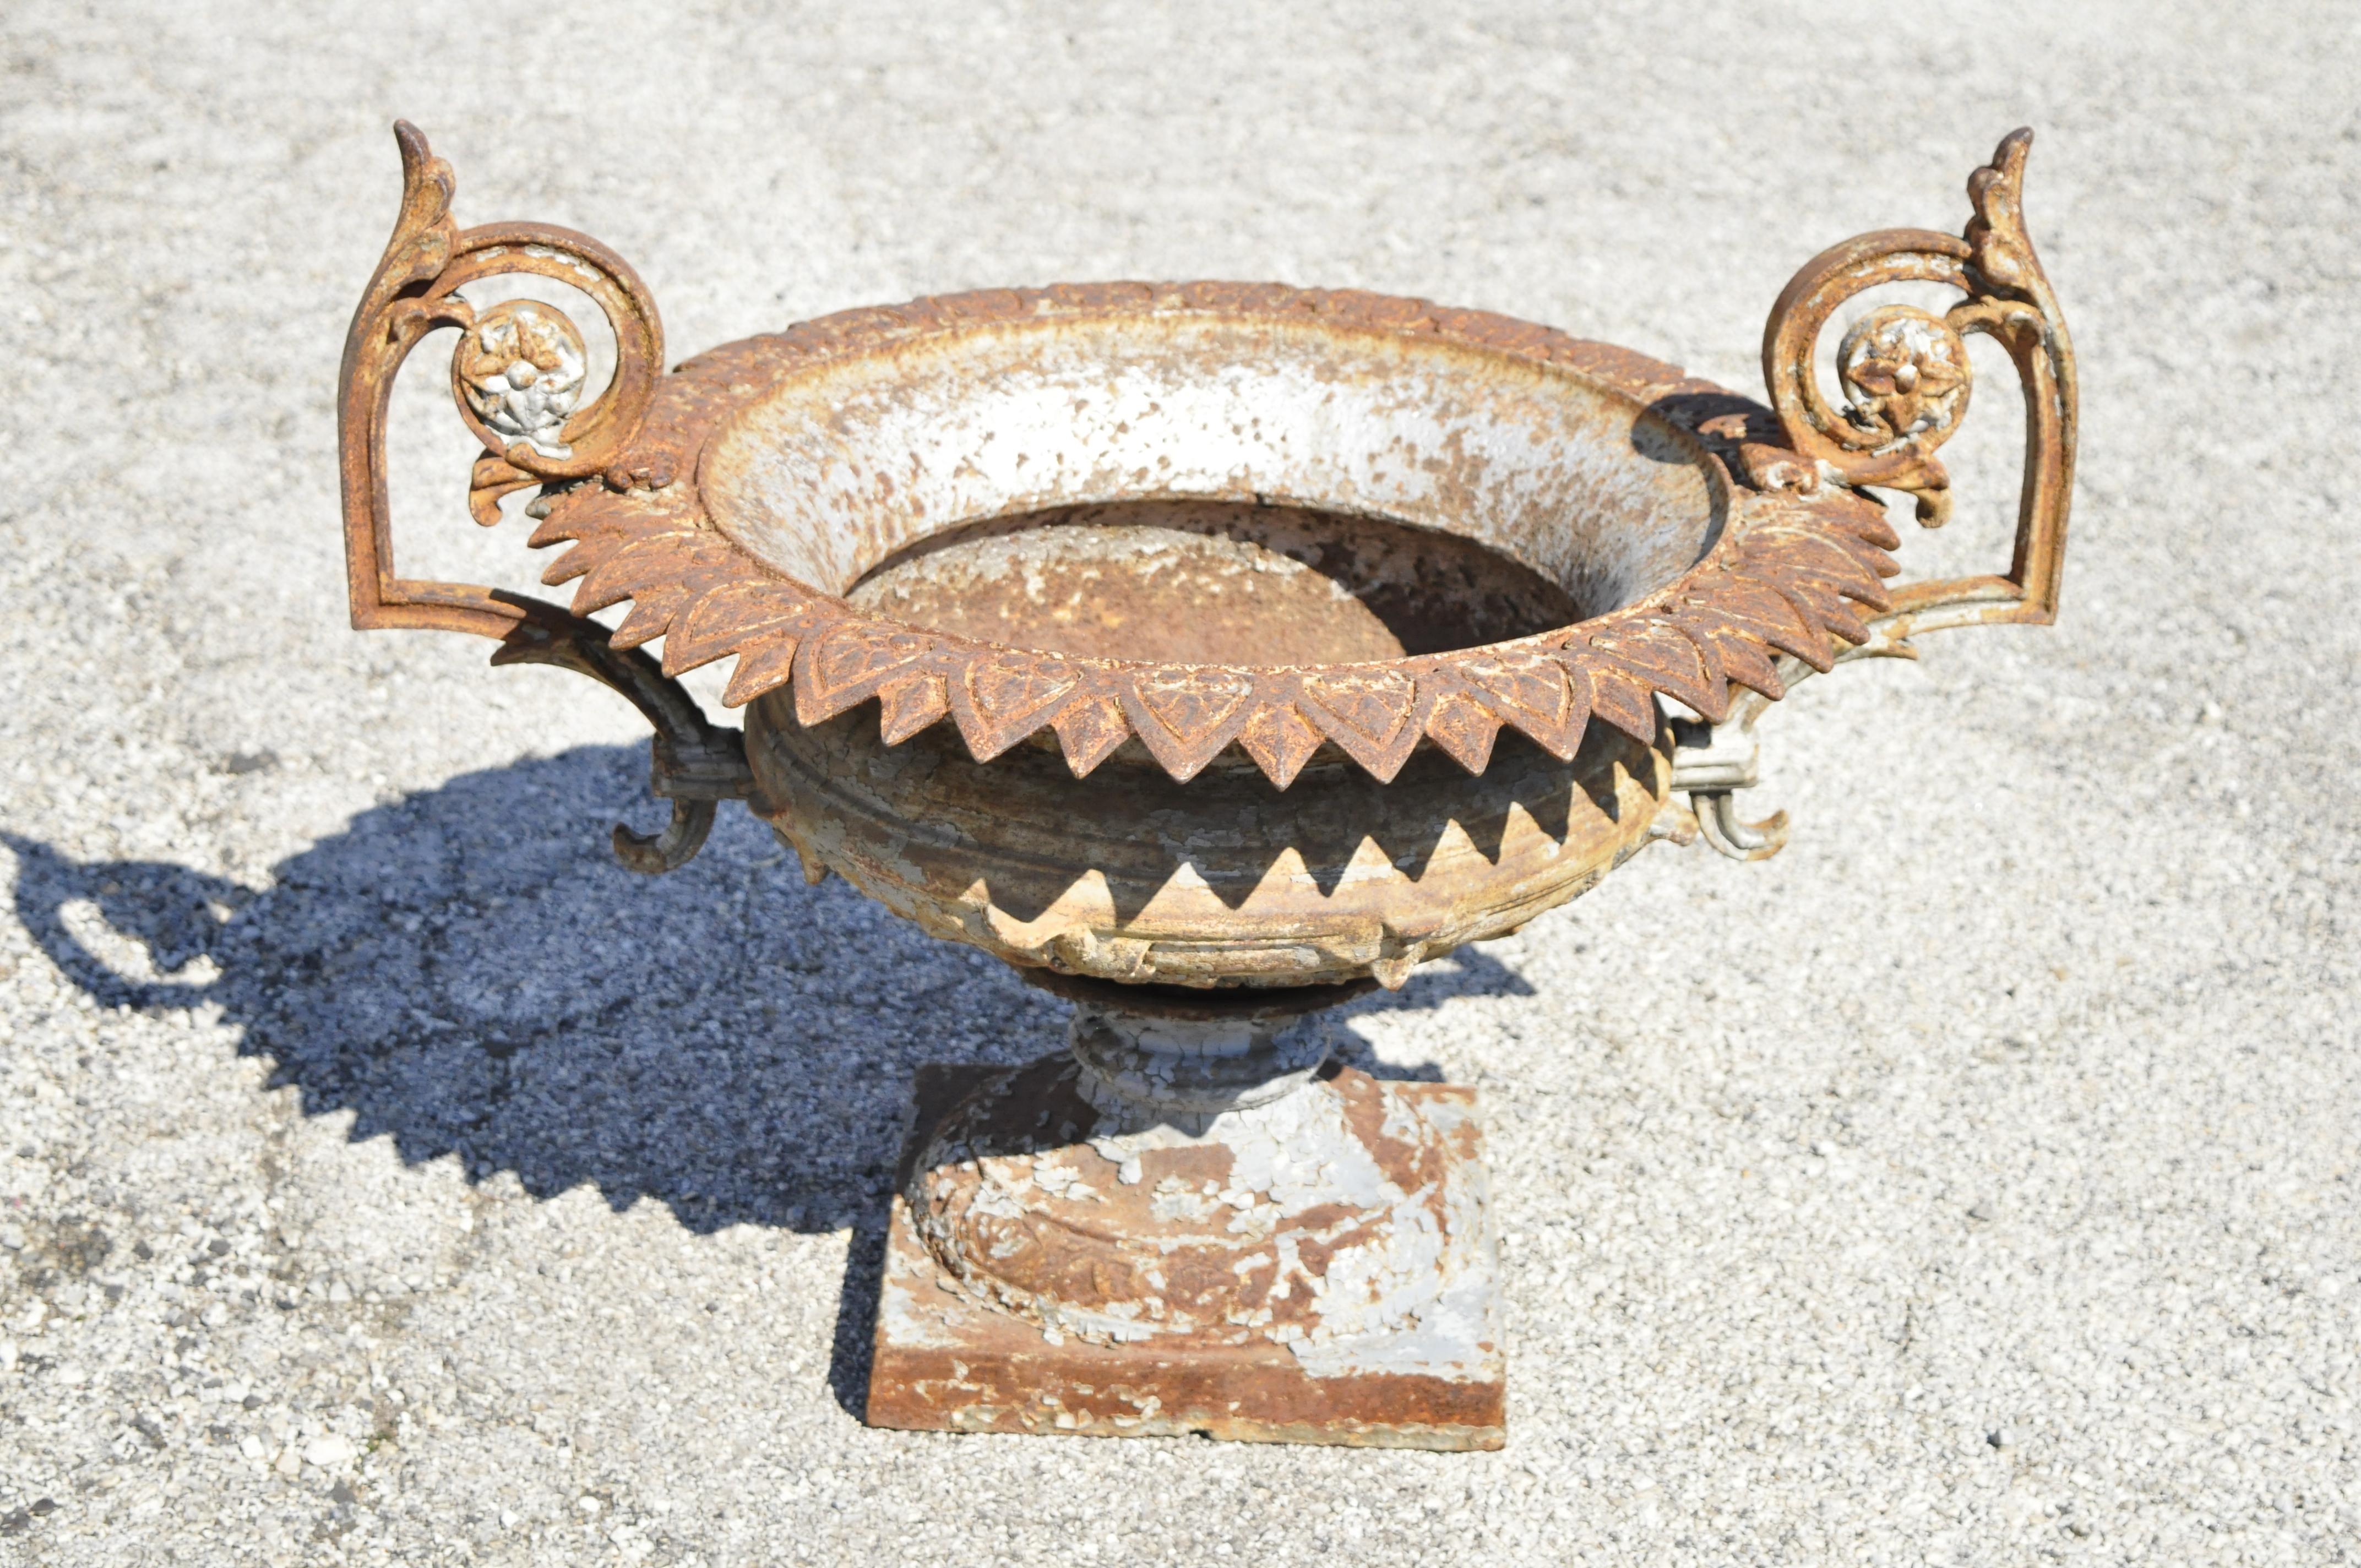 Antique J.W. Fiske attr. French cast iron urn garden planter with twin handles. Item features original weathered/distressed finish, leafy edges, ornate handles, cast iron construction, very nice antique item, great style and form. Attributed to J.W.